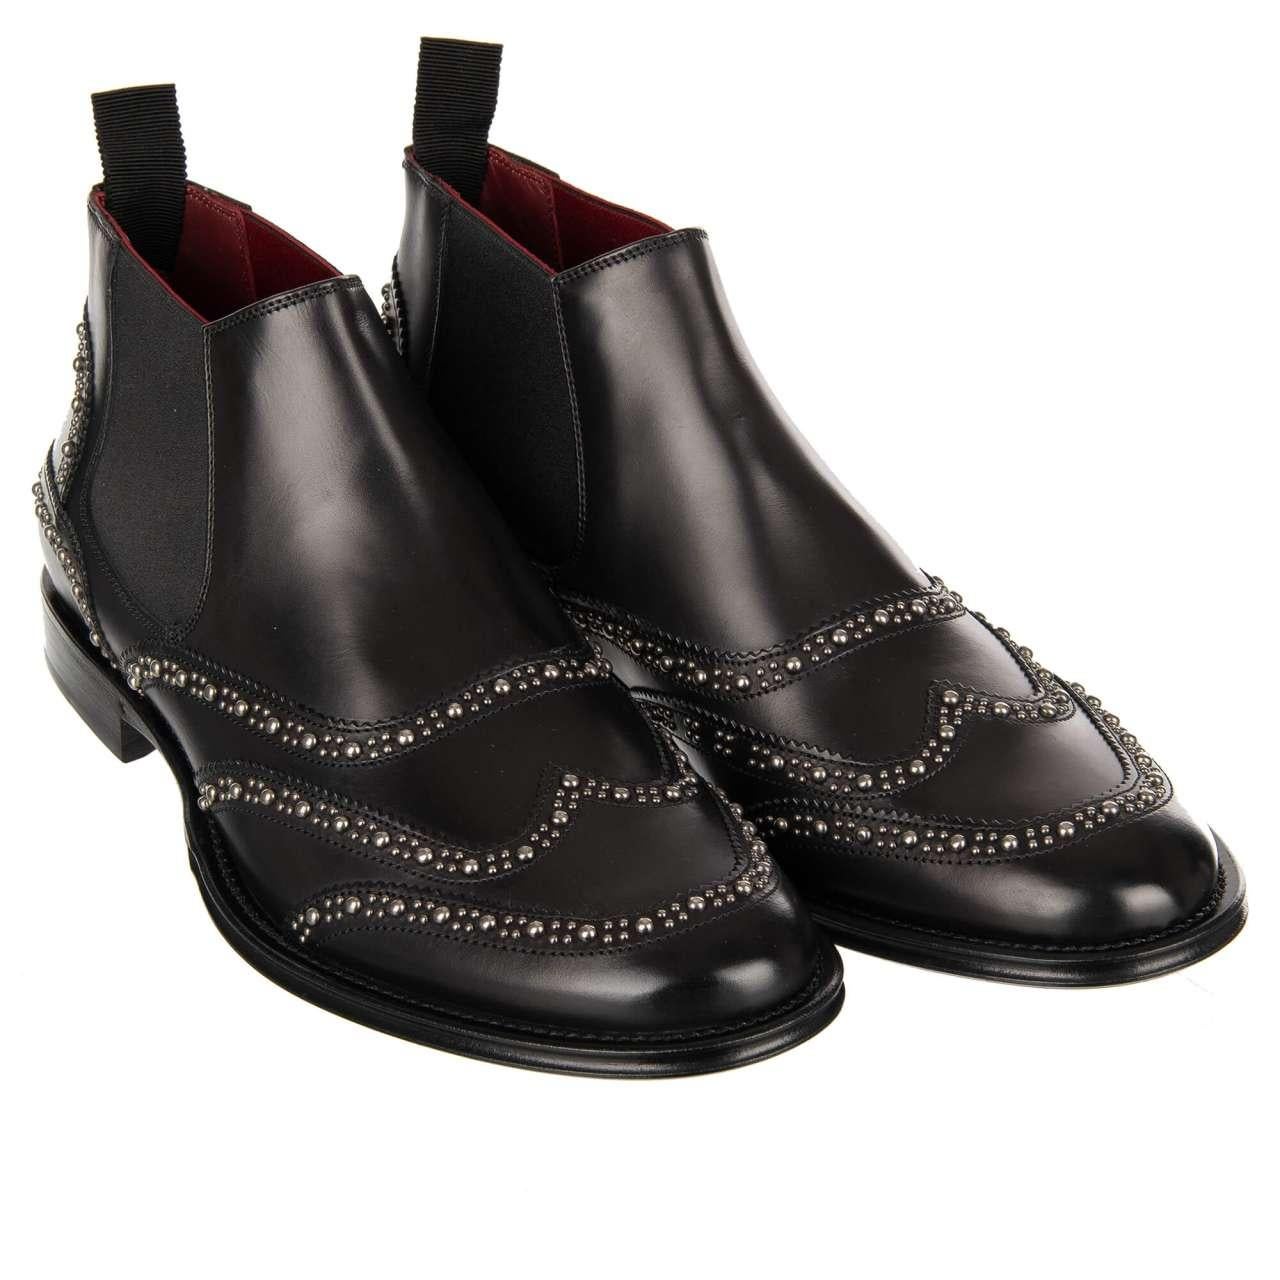 - Ankle Boots Shoes MARSALA made of calfskin embellished with many studs by DOLCE & GABBANA - MADE IN ITALY - Former RRP: EUR 1.250 - New with Box - Model: A60184-AZ894-8S241 - Material: 100% Calfskin - Sole: Leather with DG Logo - Color: Black -